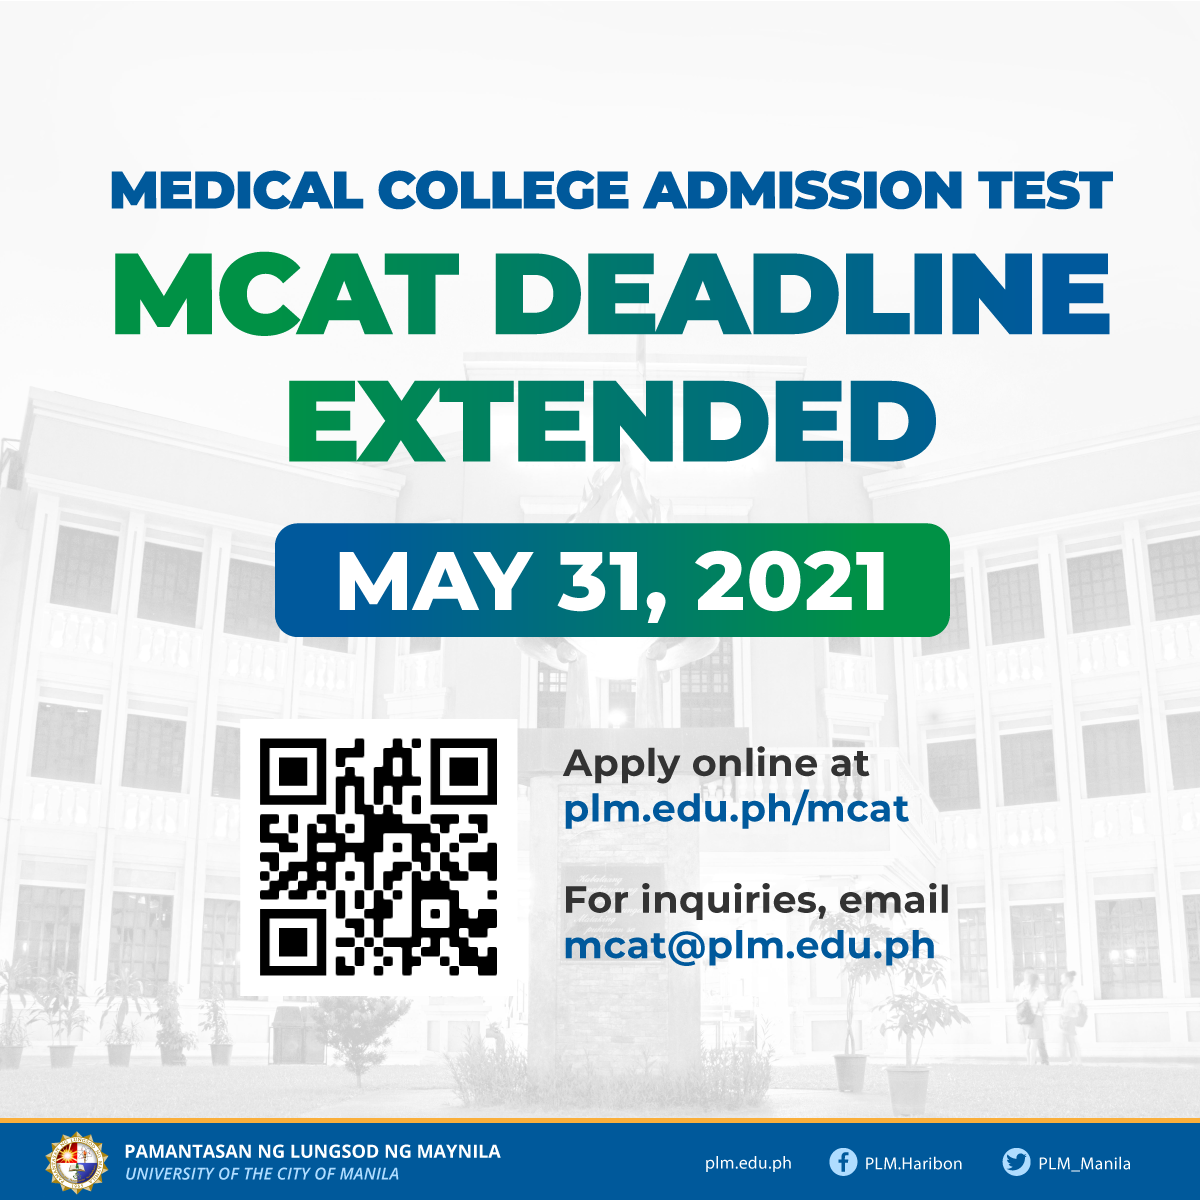 MCAT application deadline extended until May 31, 2021